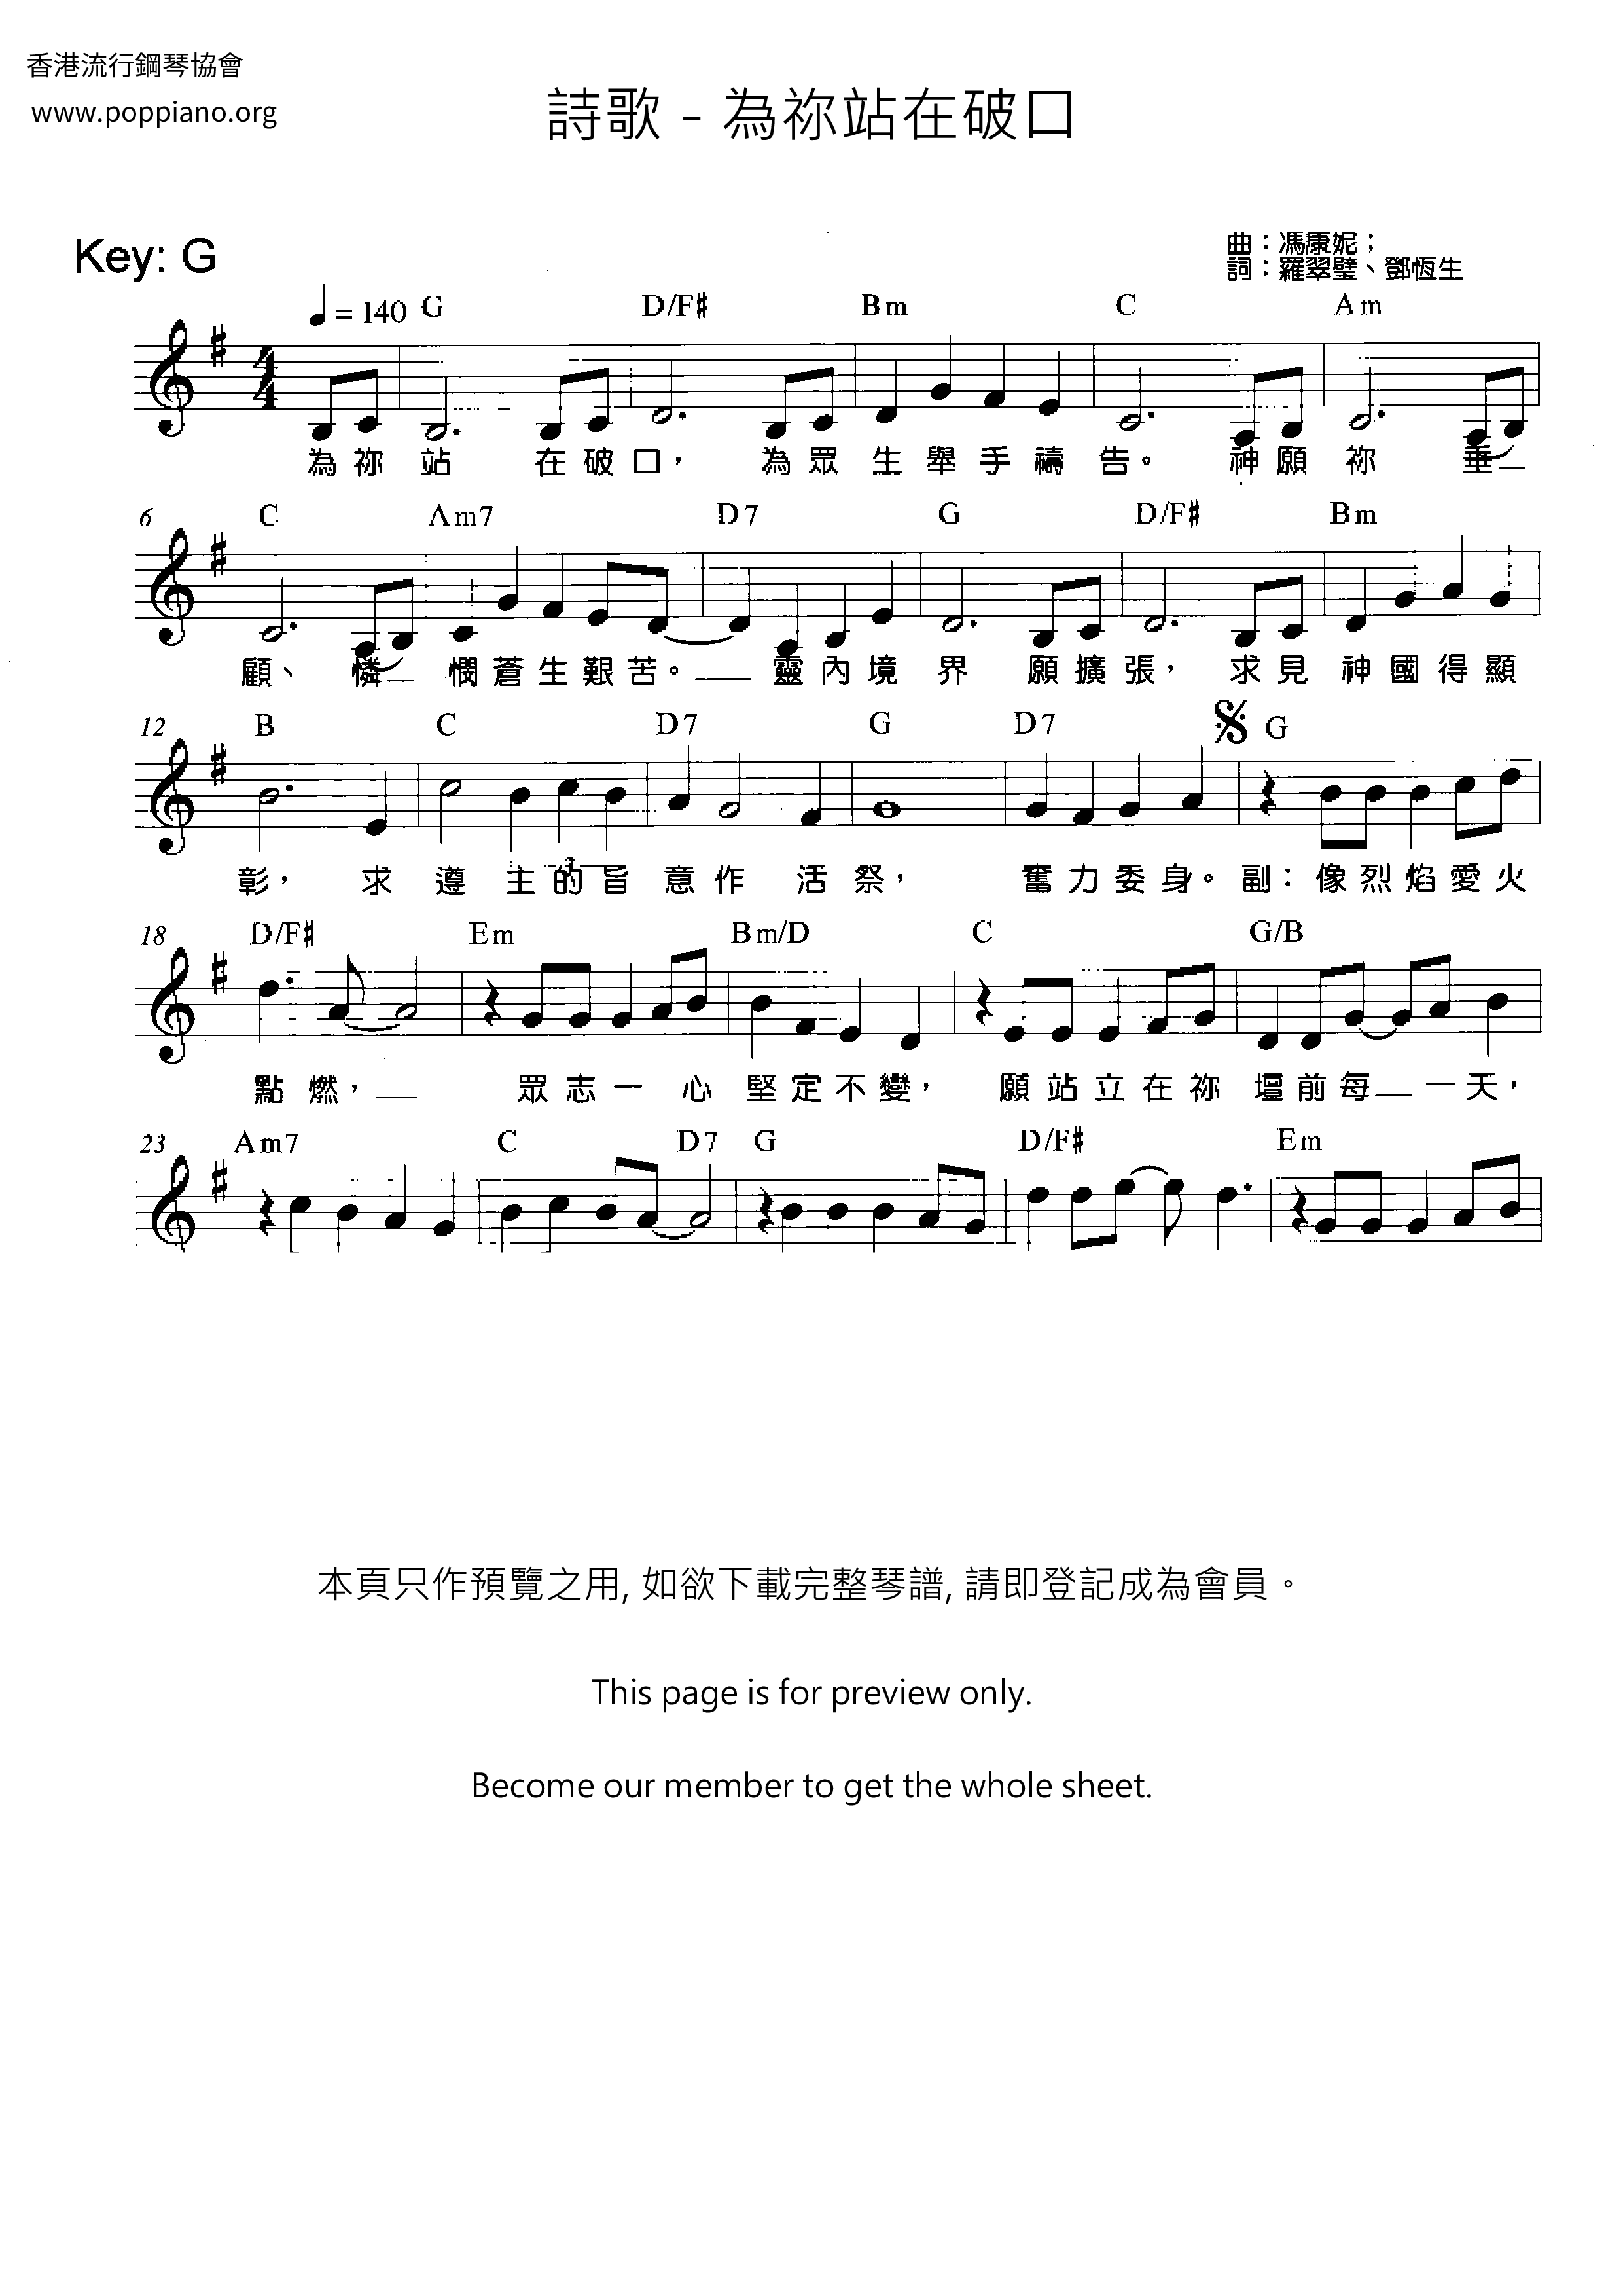 Stand For You Score